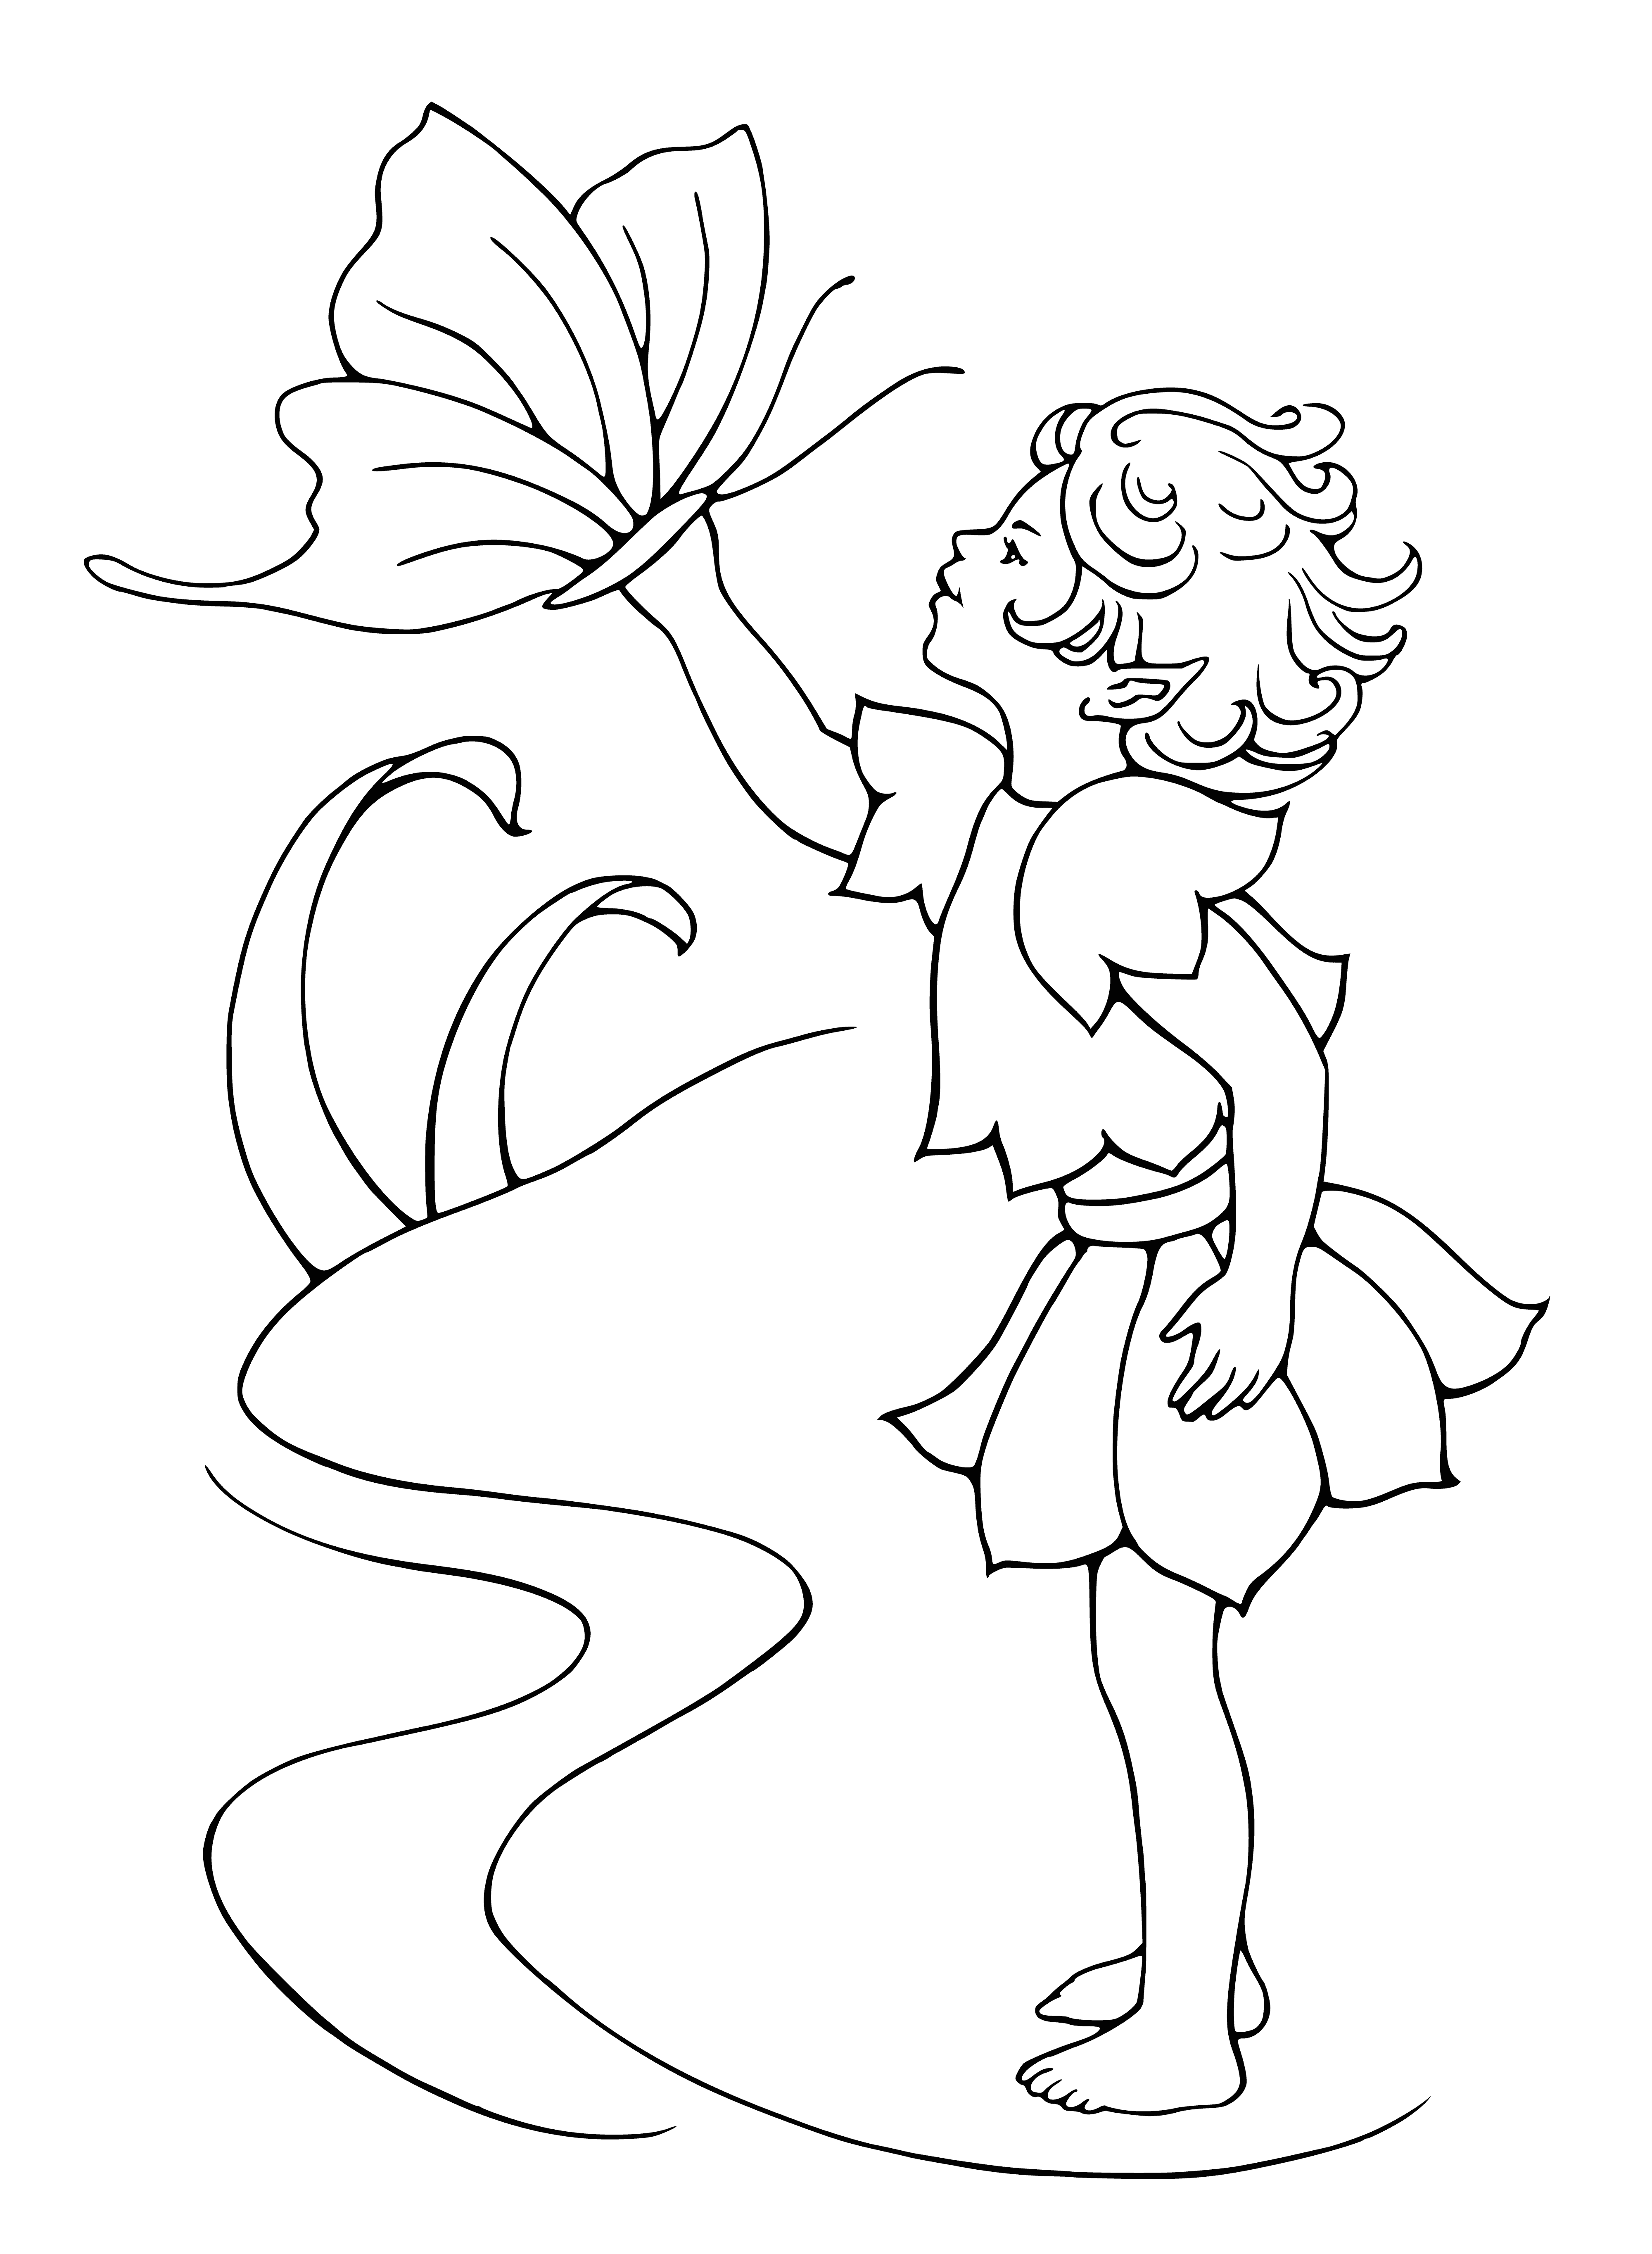 coloring page: Elf & fairy stand in a flower field, the elf w/ pointy ears & a mischievous smile & the fairy w/ dress of flower petals & wings. Both have blonde hair.